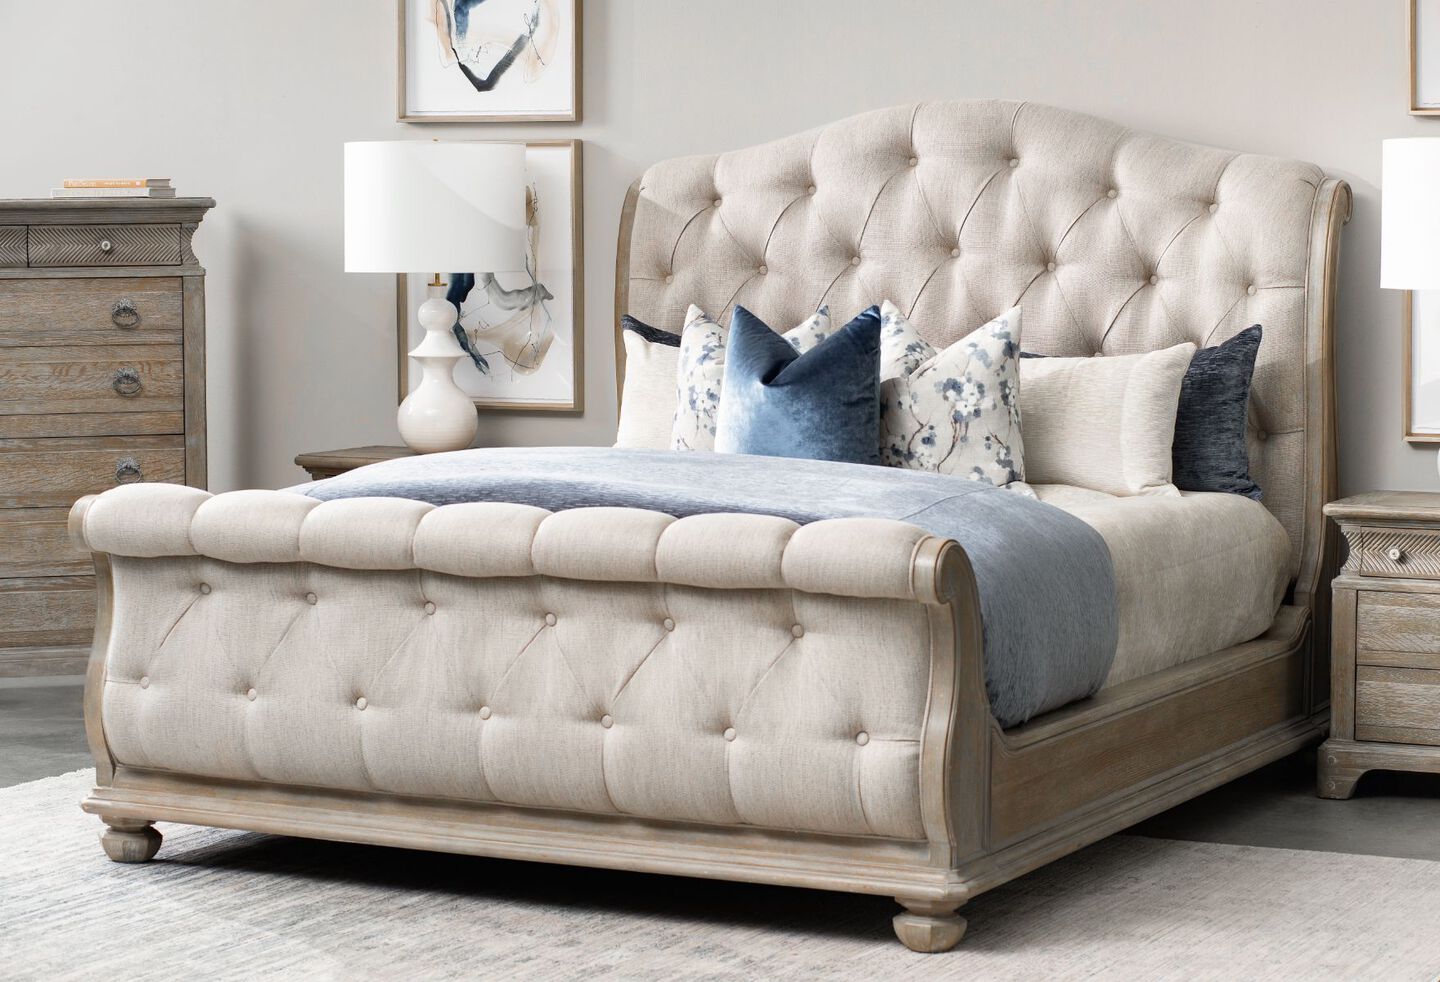 Light grey upholstered sleigh bed with blue and white pillows on top